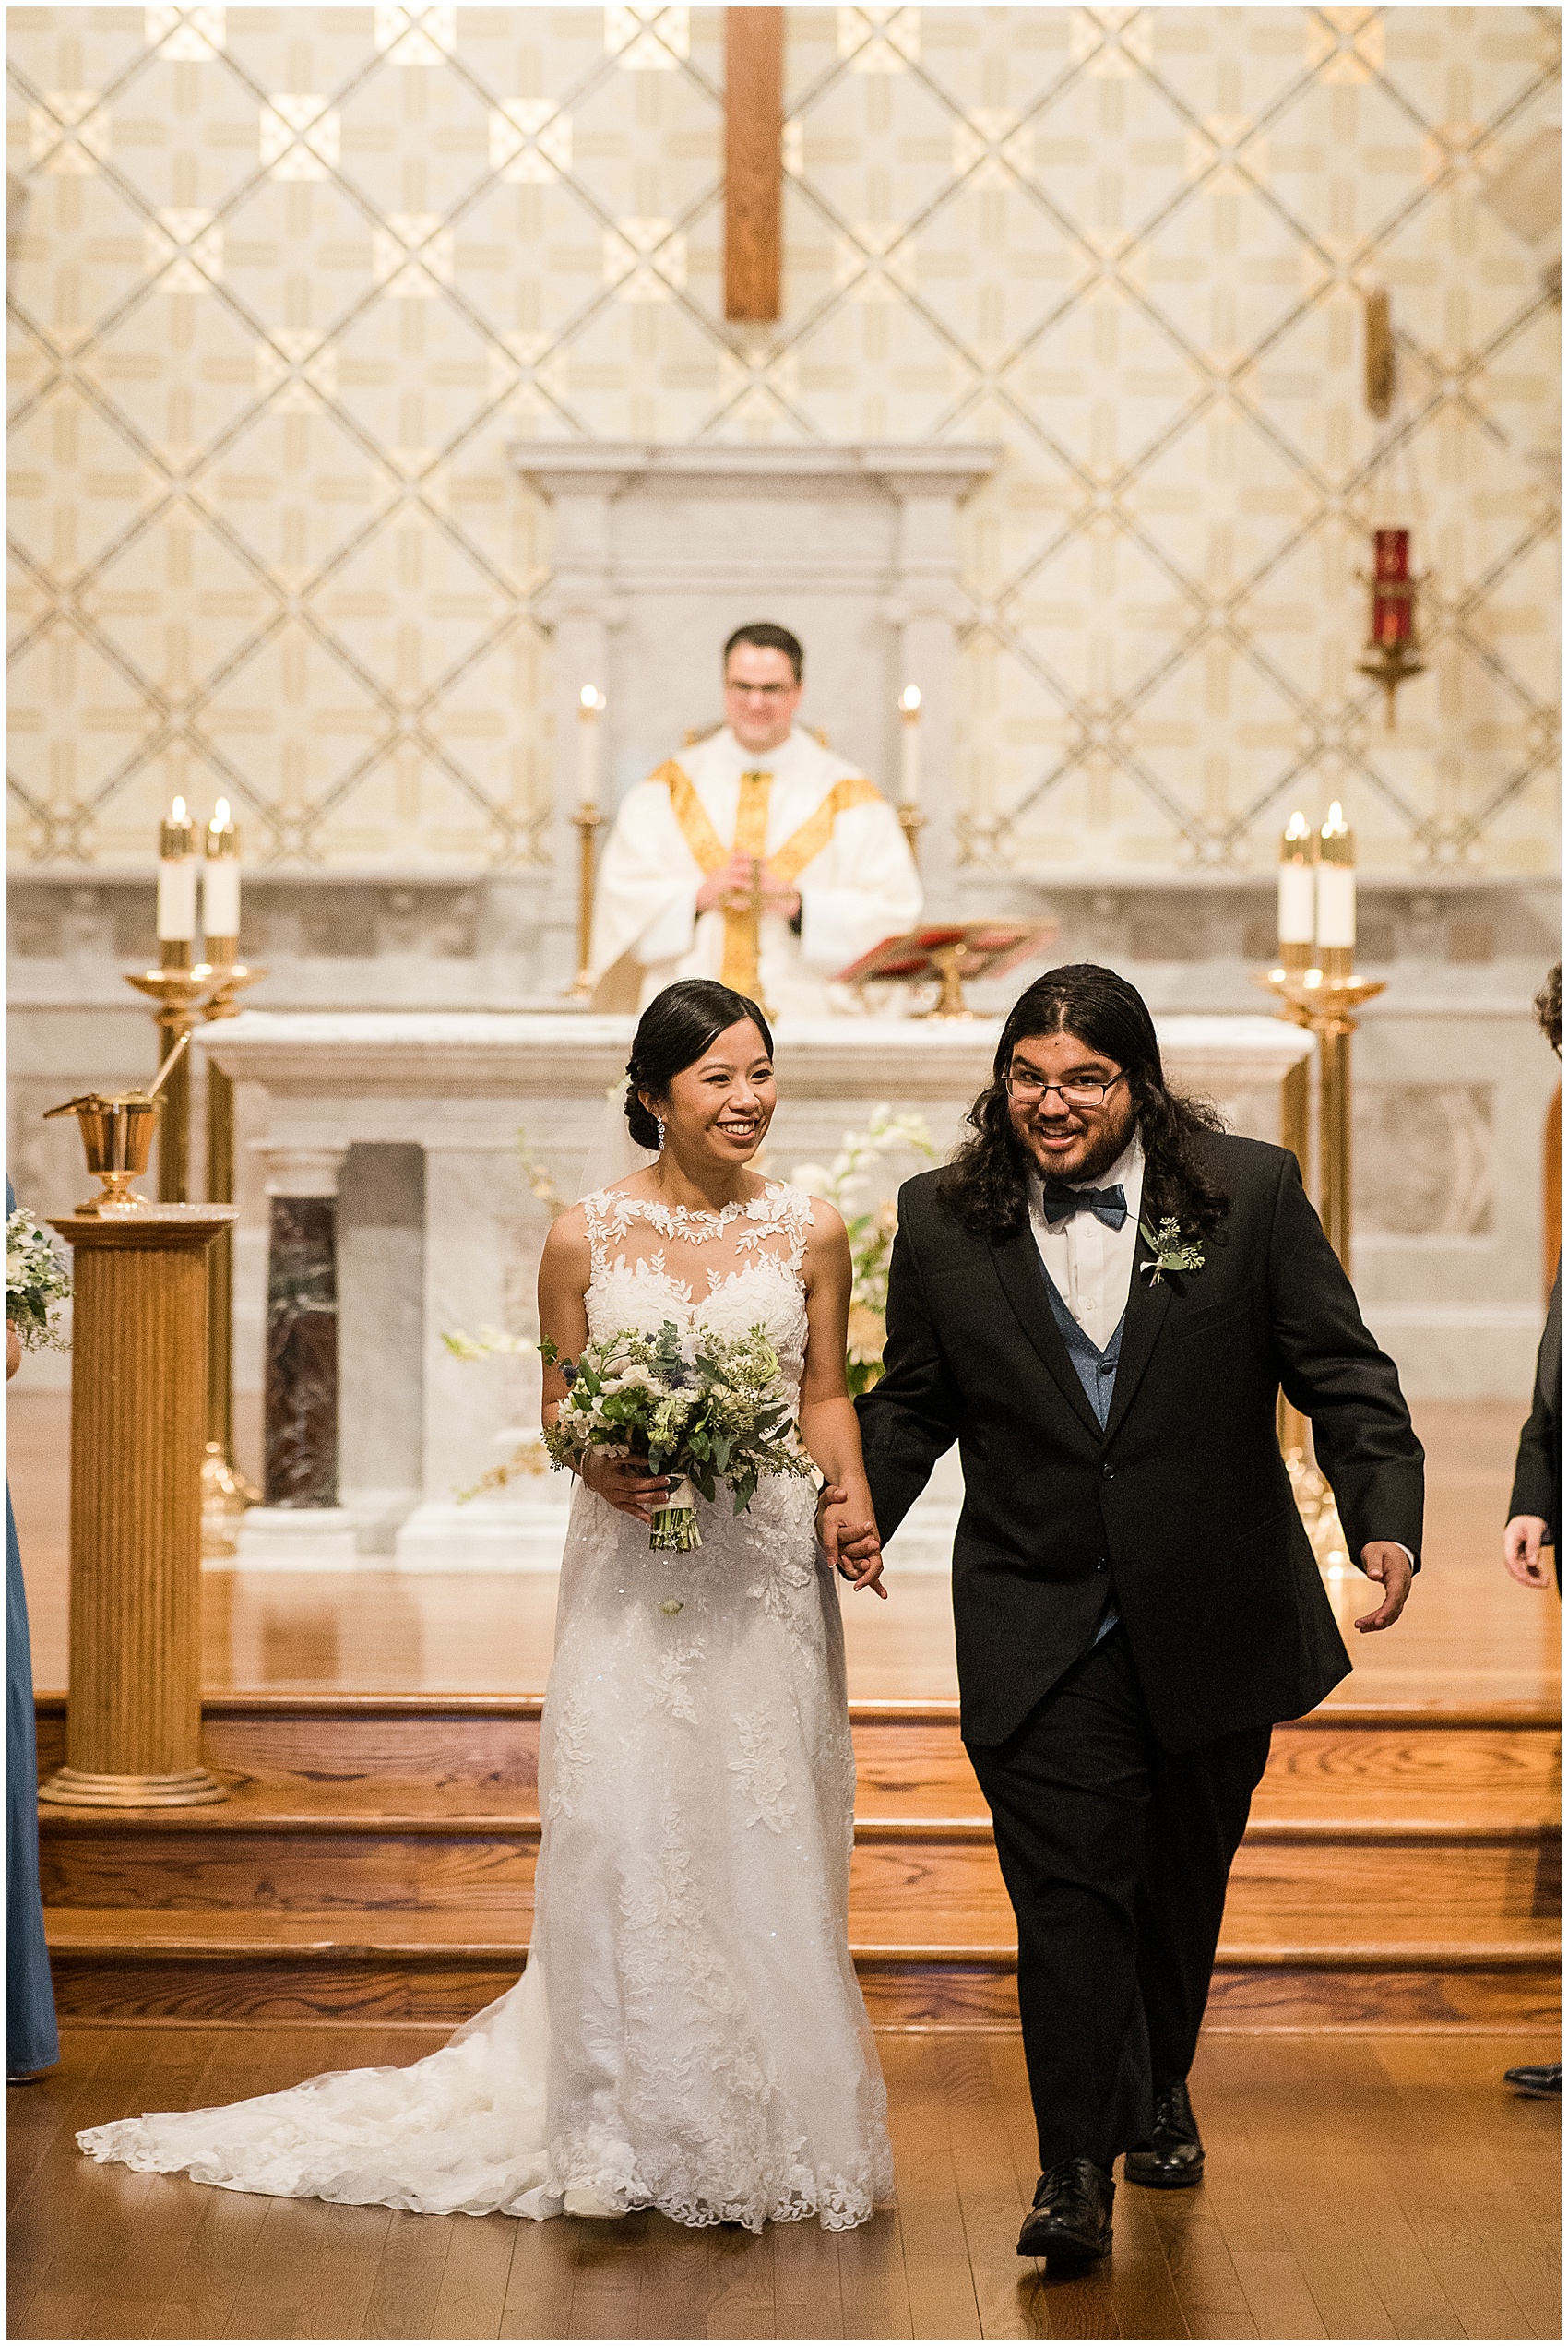 bride and groom walking down the aisle at their church ceremony